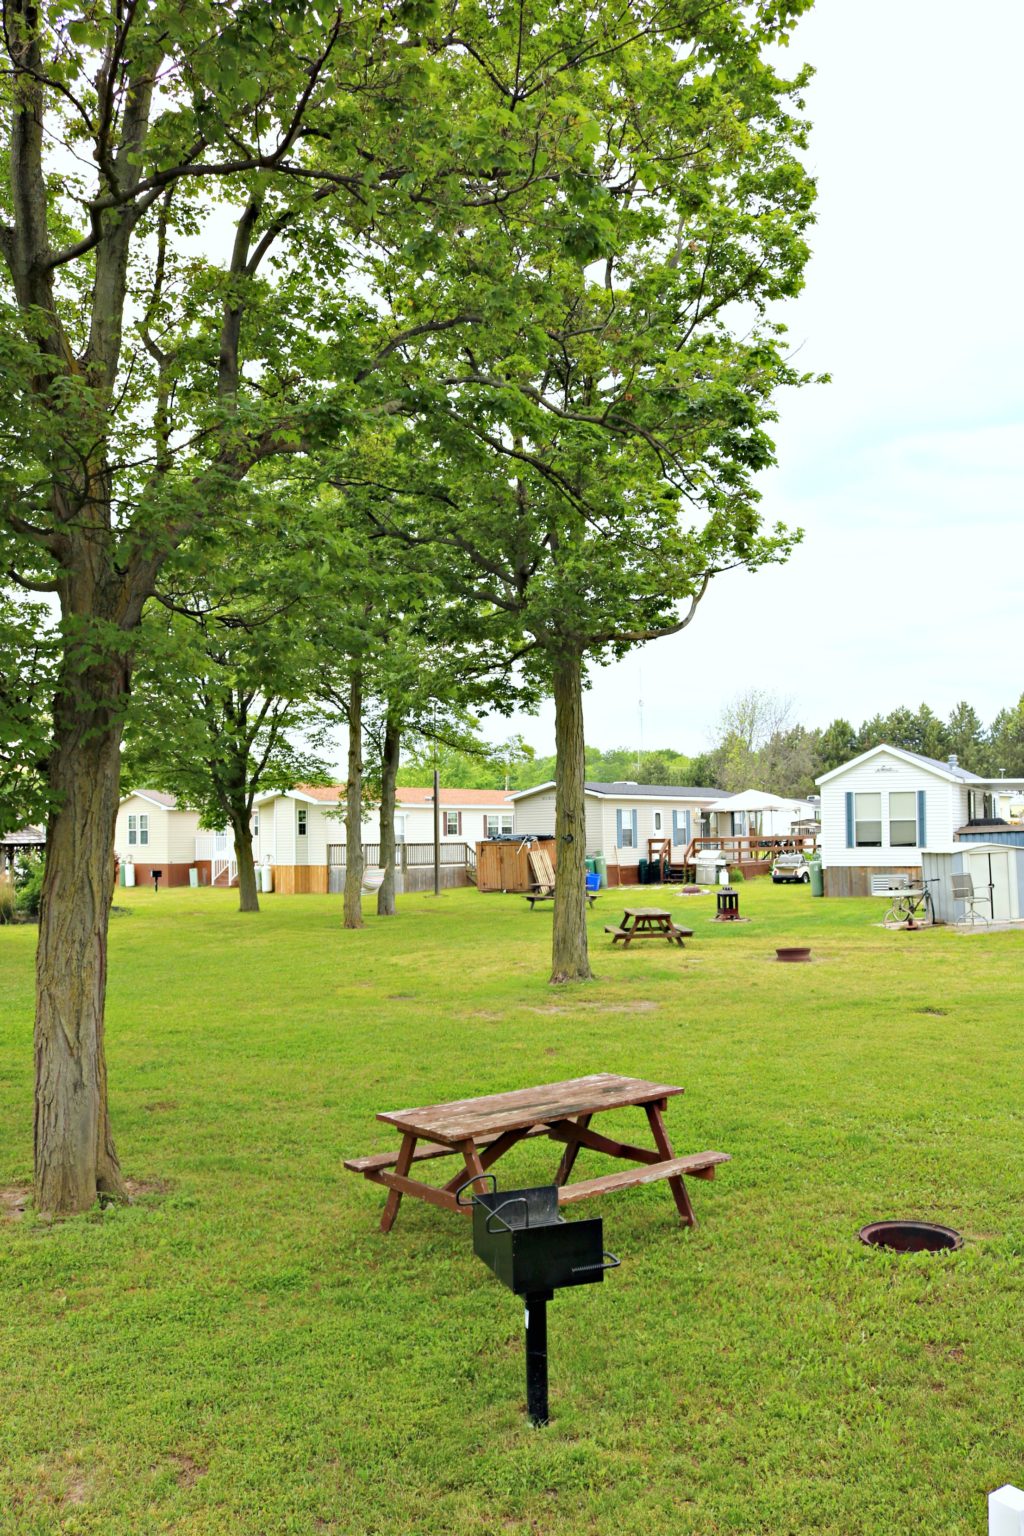 A view of the other Sherkston Shores properties with their designated picnic tables, BBQ, and fire pit.